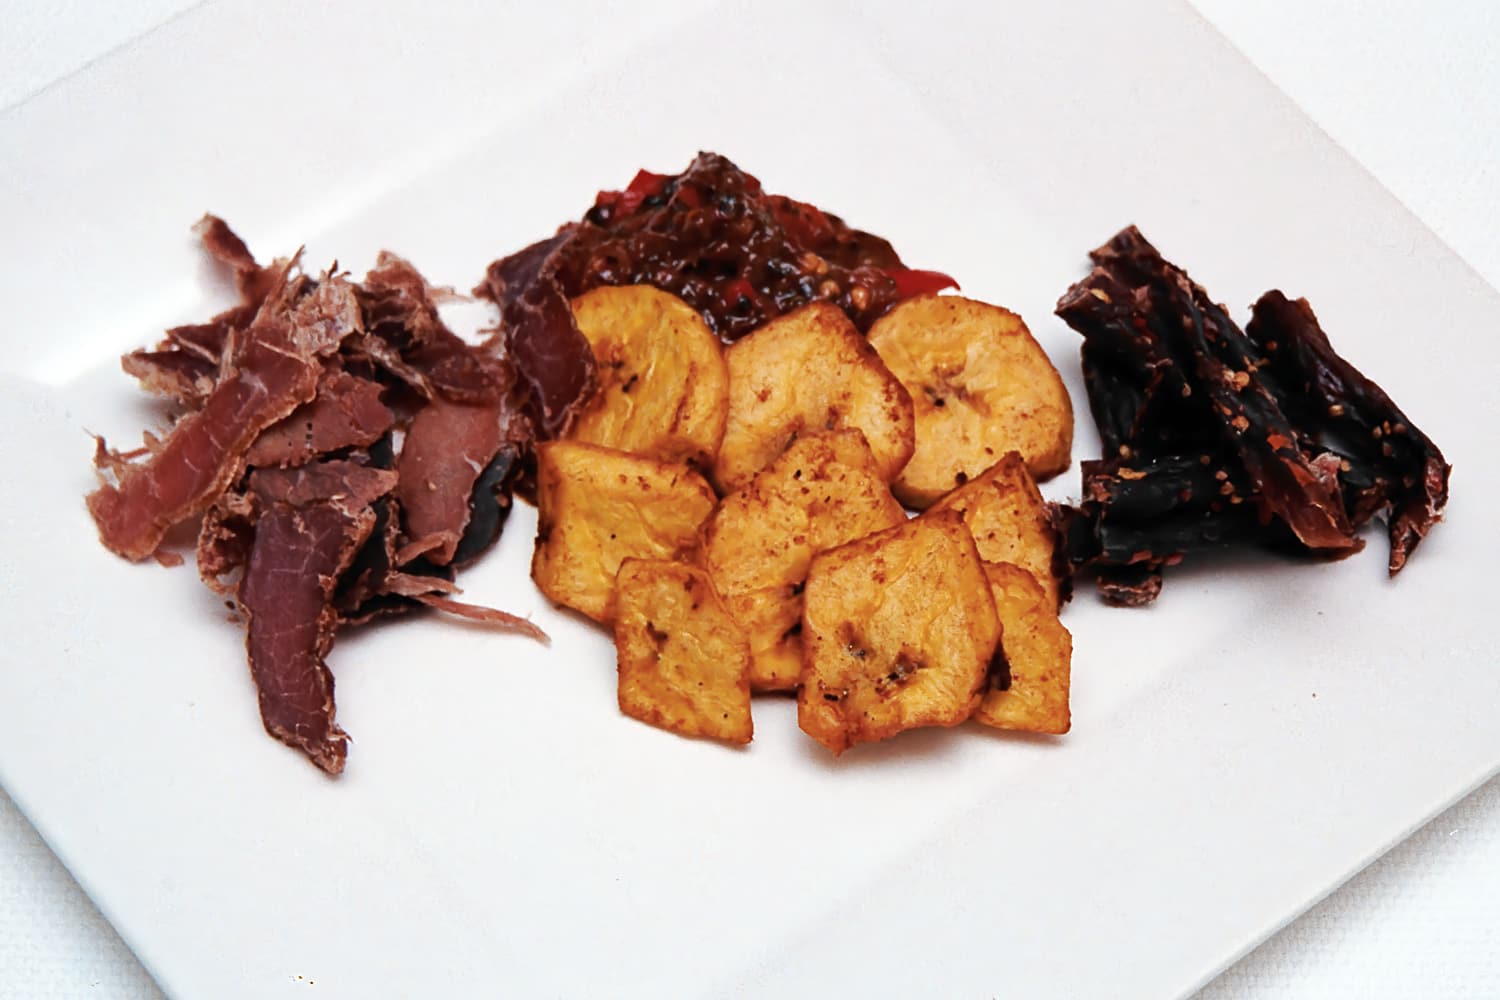 Plantain Chips served with various meats